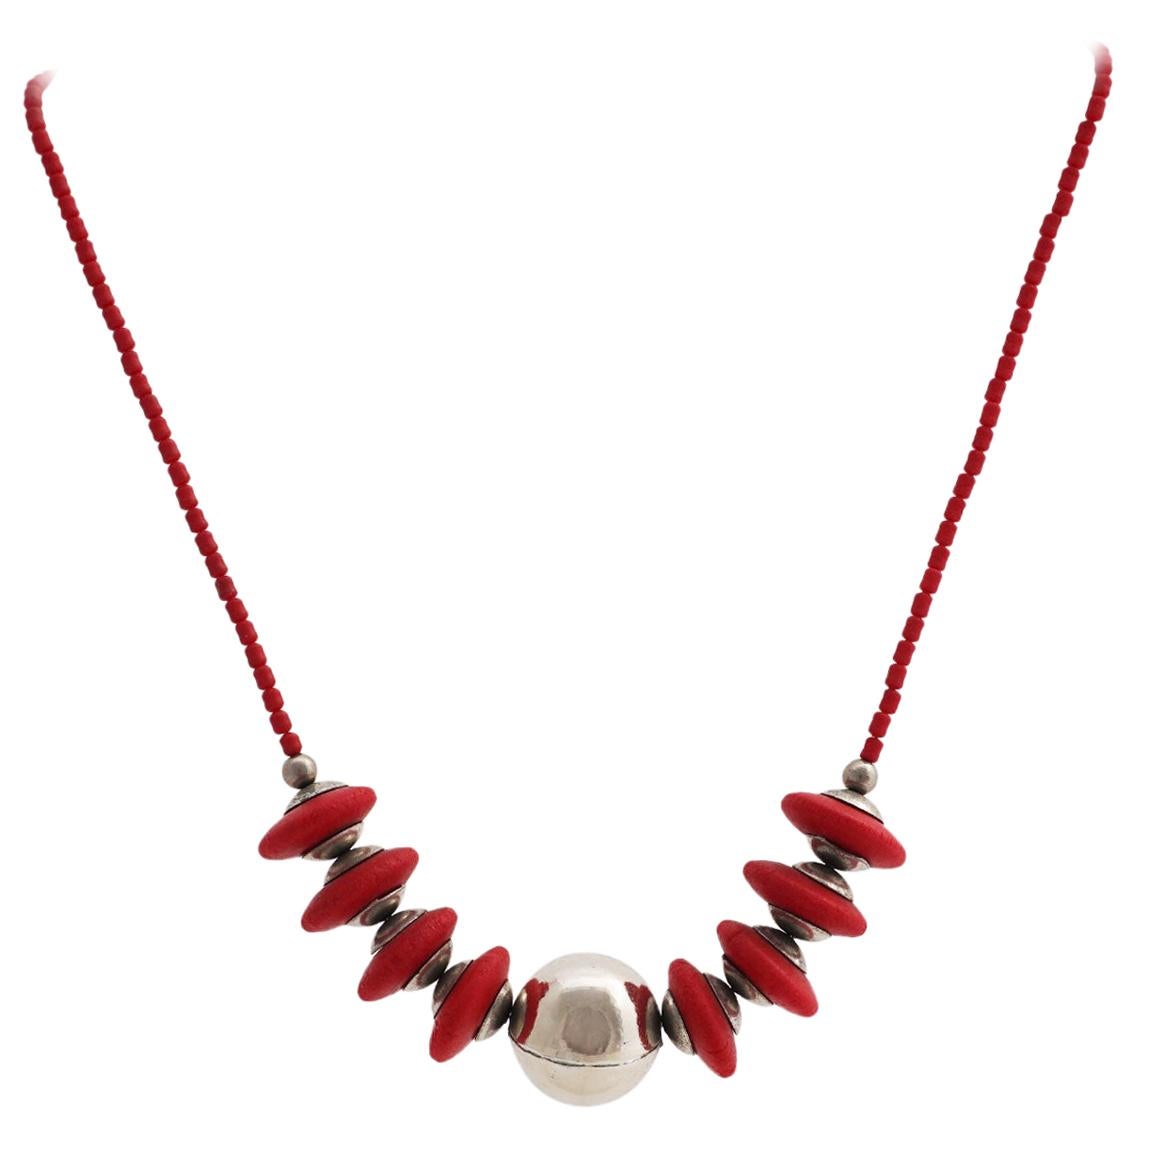 Bauhaus Collier in Chrome and Galalith by Jakob Bengel, around 1920/30 For Sale